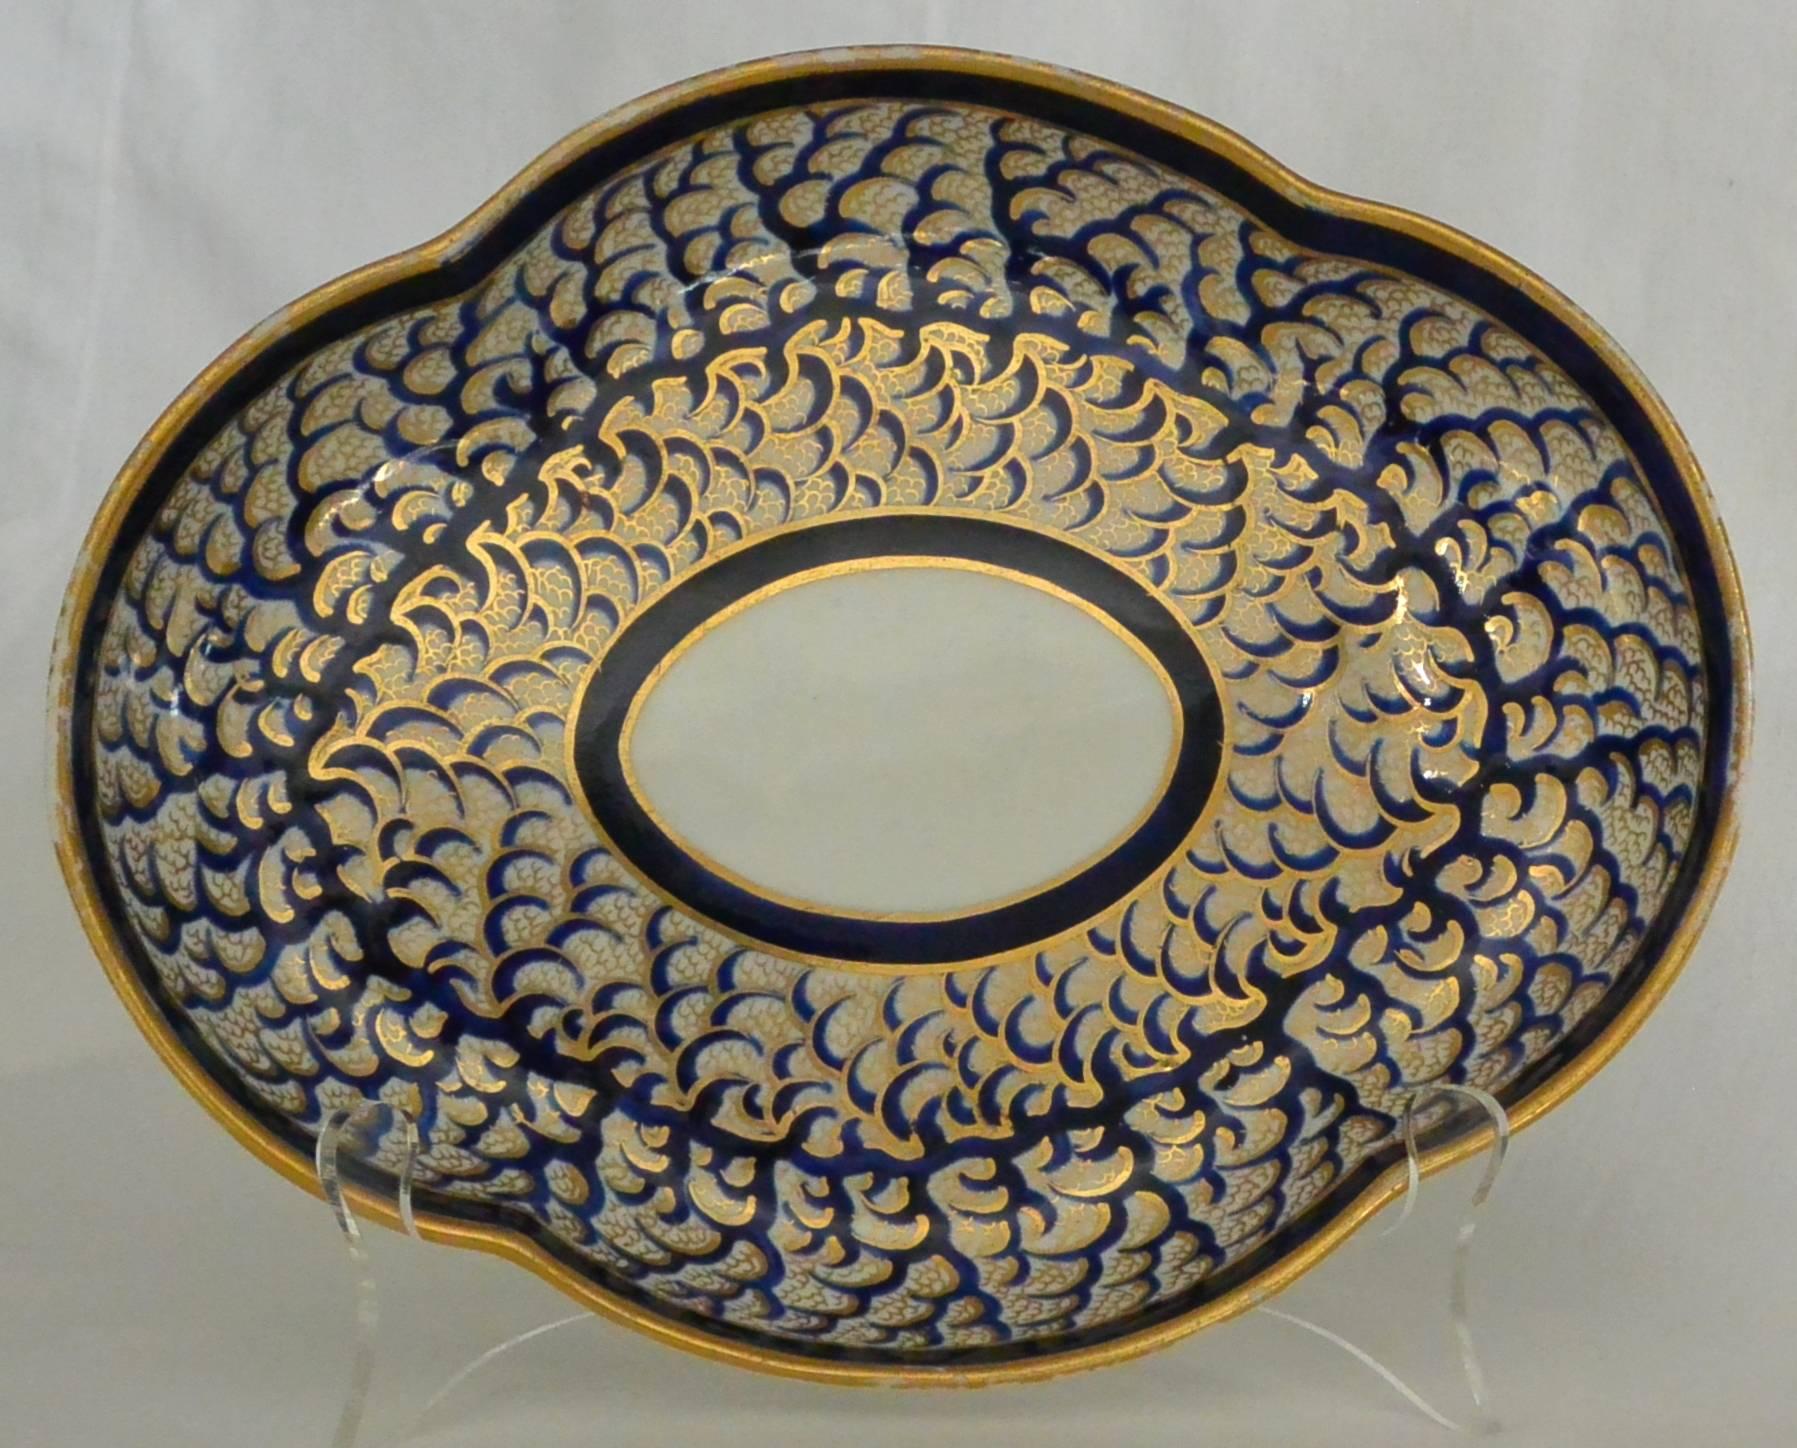 Pair Derby Blue and Gold Plates. Pair shaped plates in the form of lobed trays in rich blue and gilt painted fish-scale pattern. Red underglaze markings for Derby with crown and crossed batons. England, circa 1820
Dimension: 10